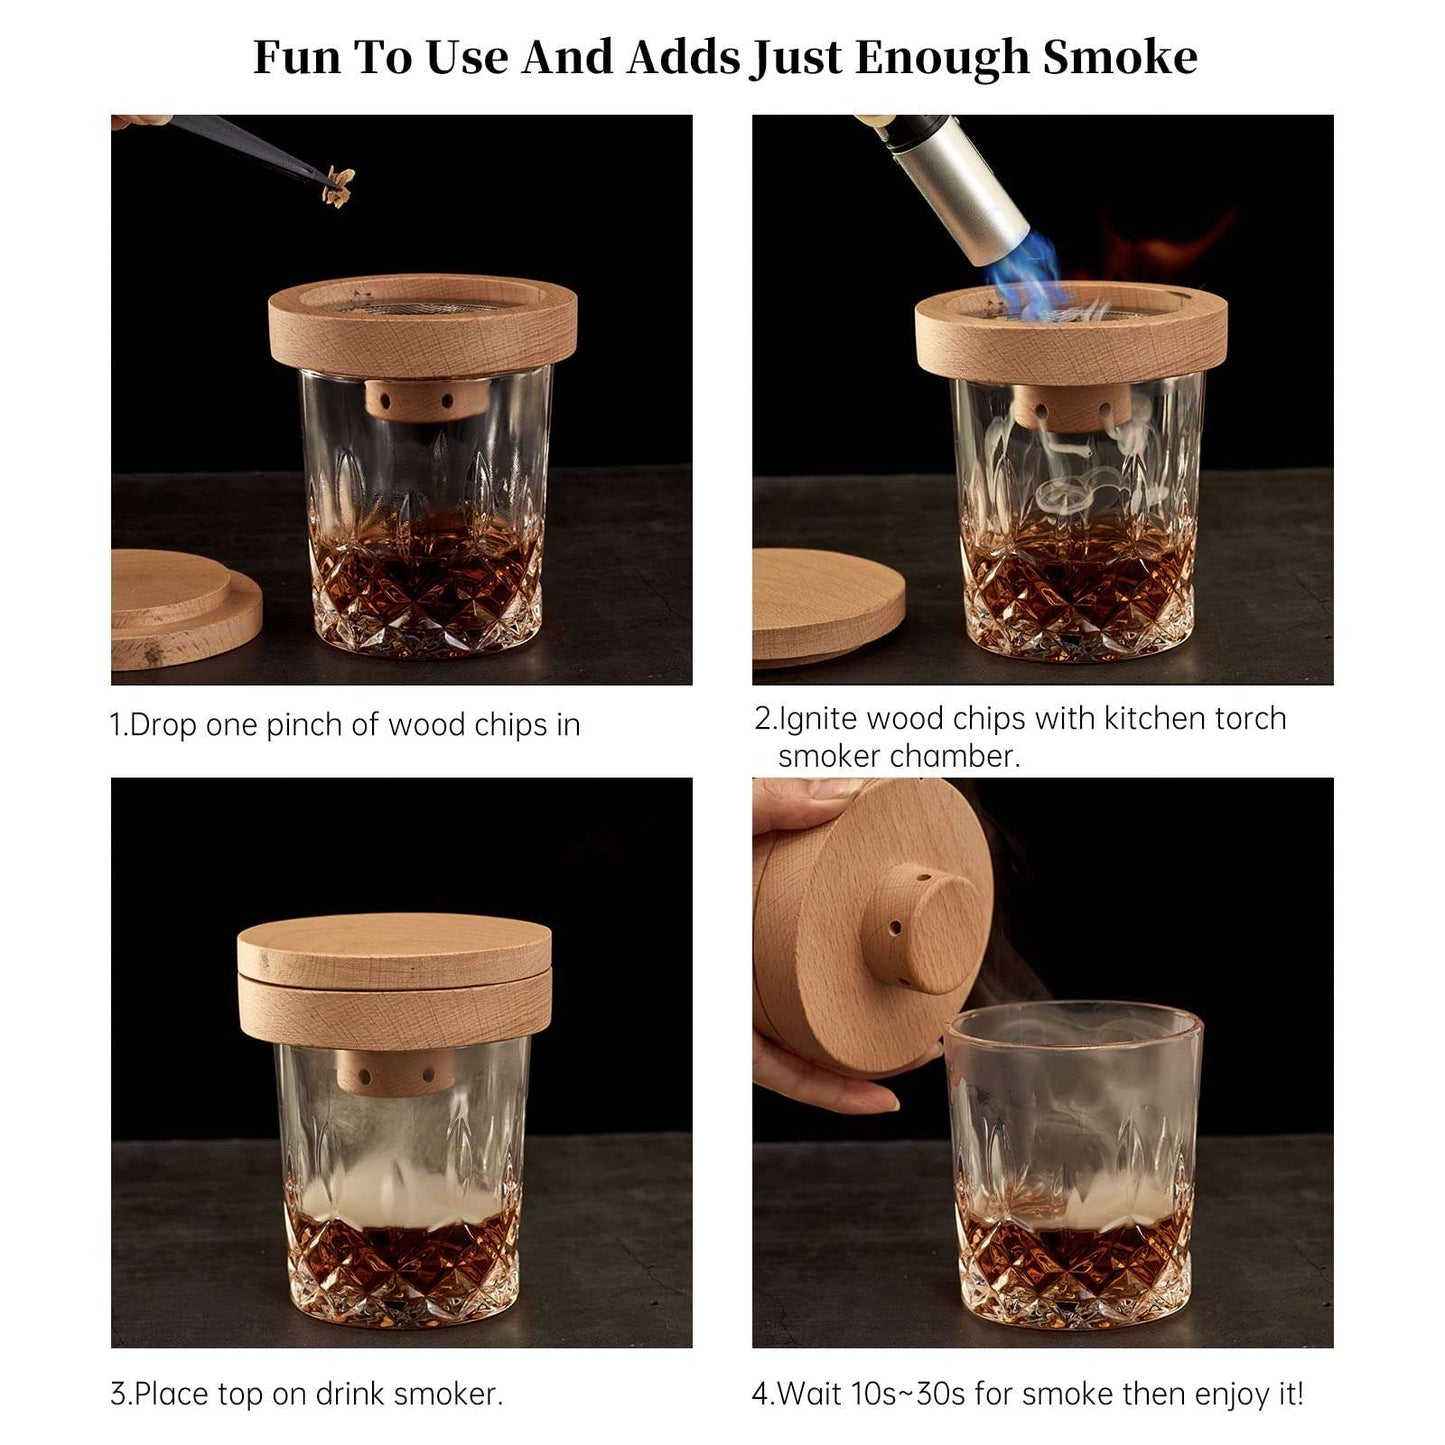 Cocktail Smoker Kit for Whiskey, Cheese and Flavor Drink - Gifting By Julia M